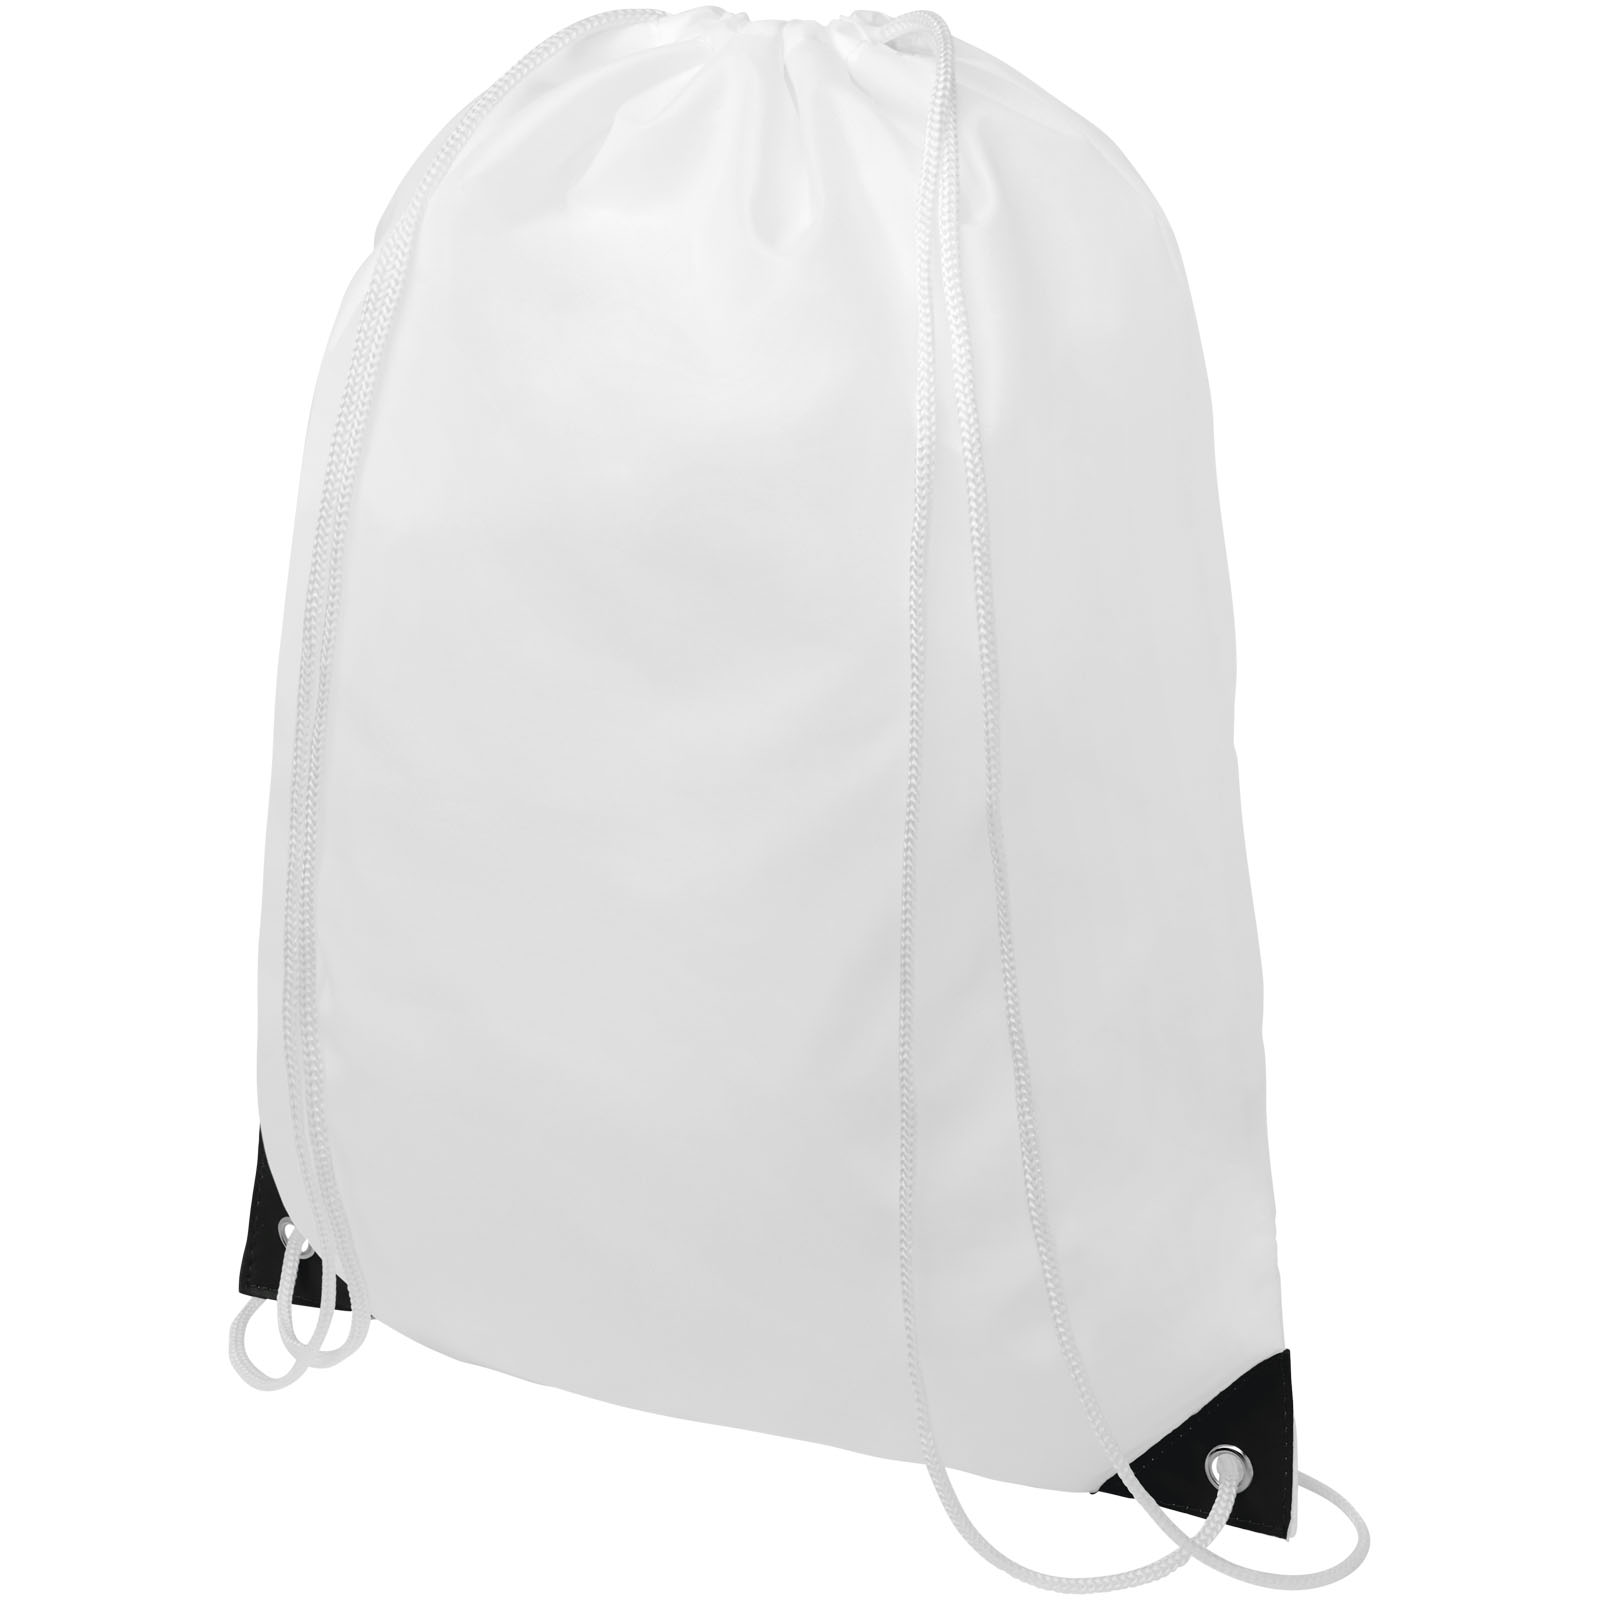 White Drawstring Backpack with Reinforced Corners - New Alresford